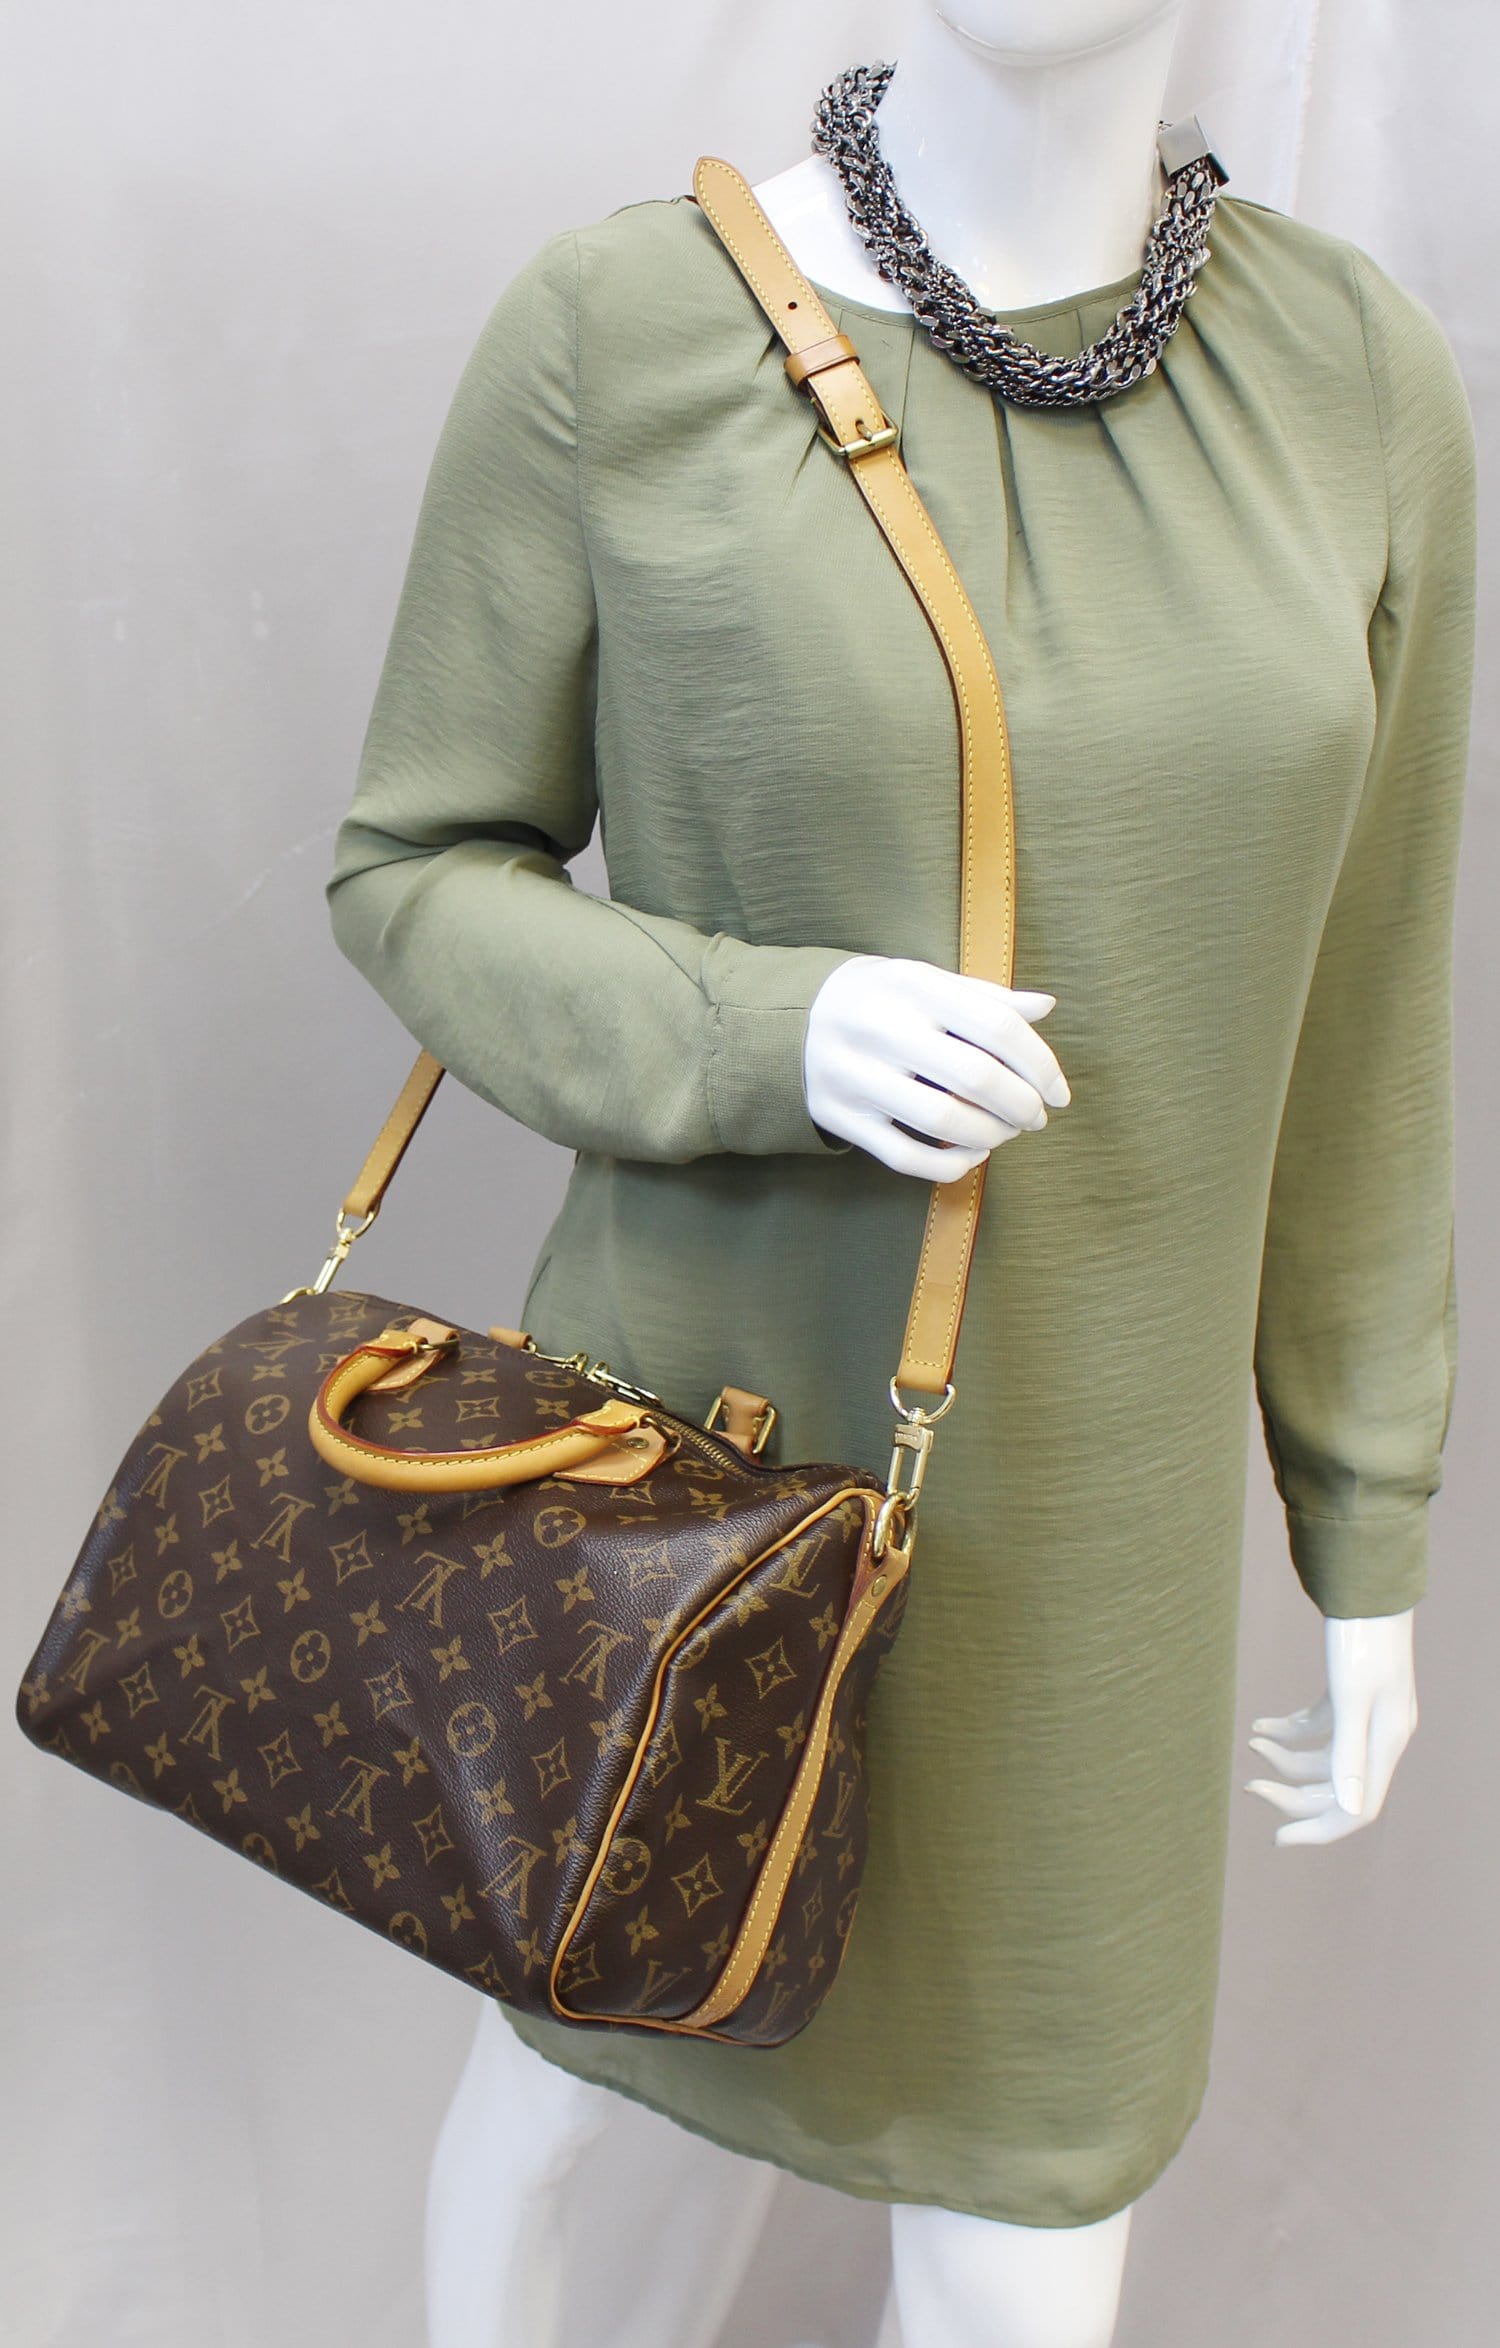 Louis Vuitton 2011 pre-owned Speedy Bandouliere 30 Travel Bag